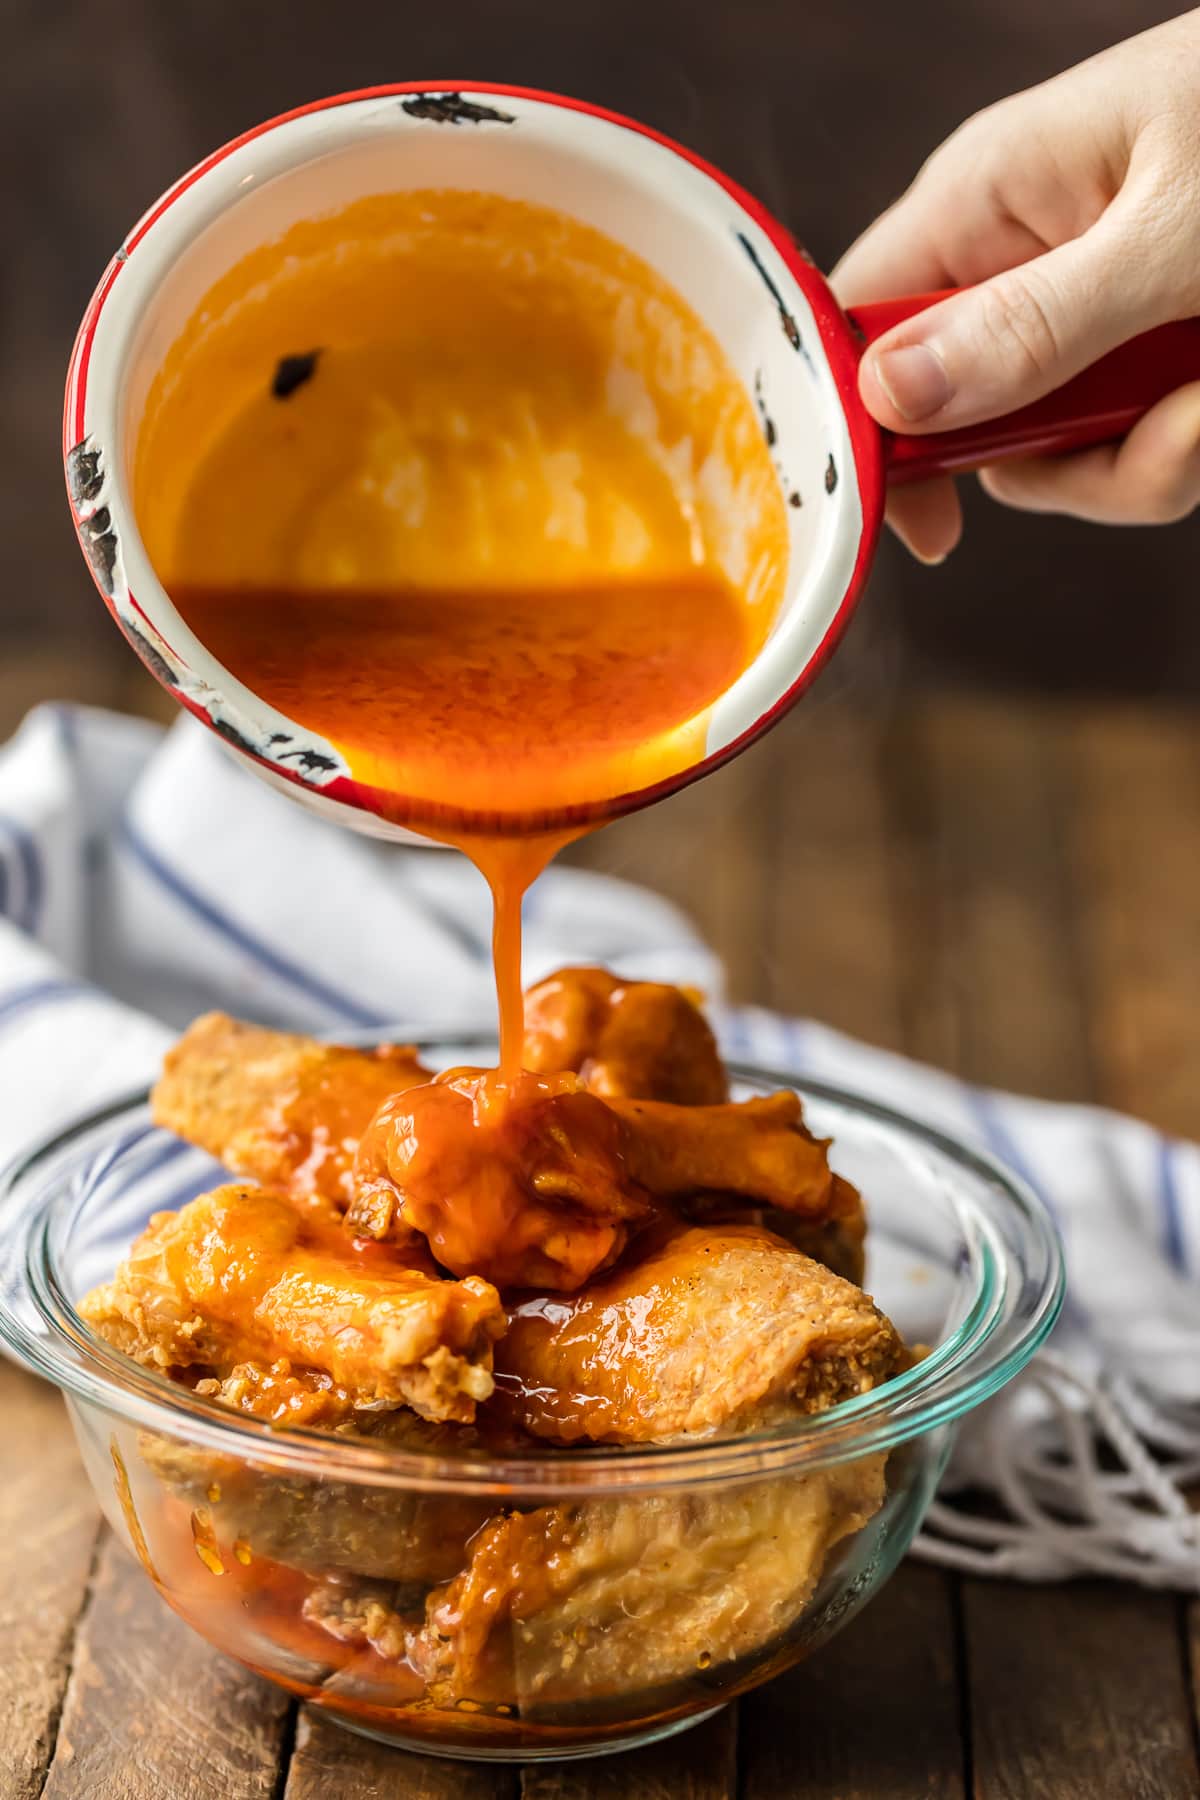 Pouring hot sauce over fried buffalo wings in a bowl